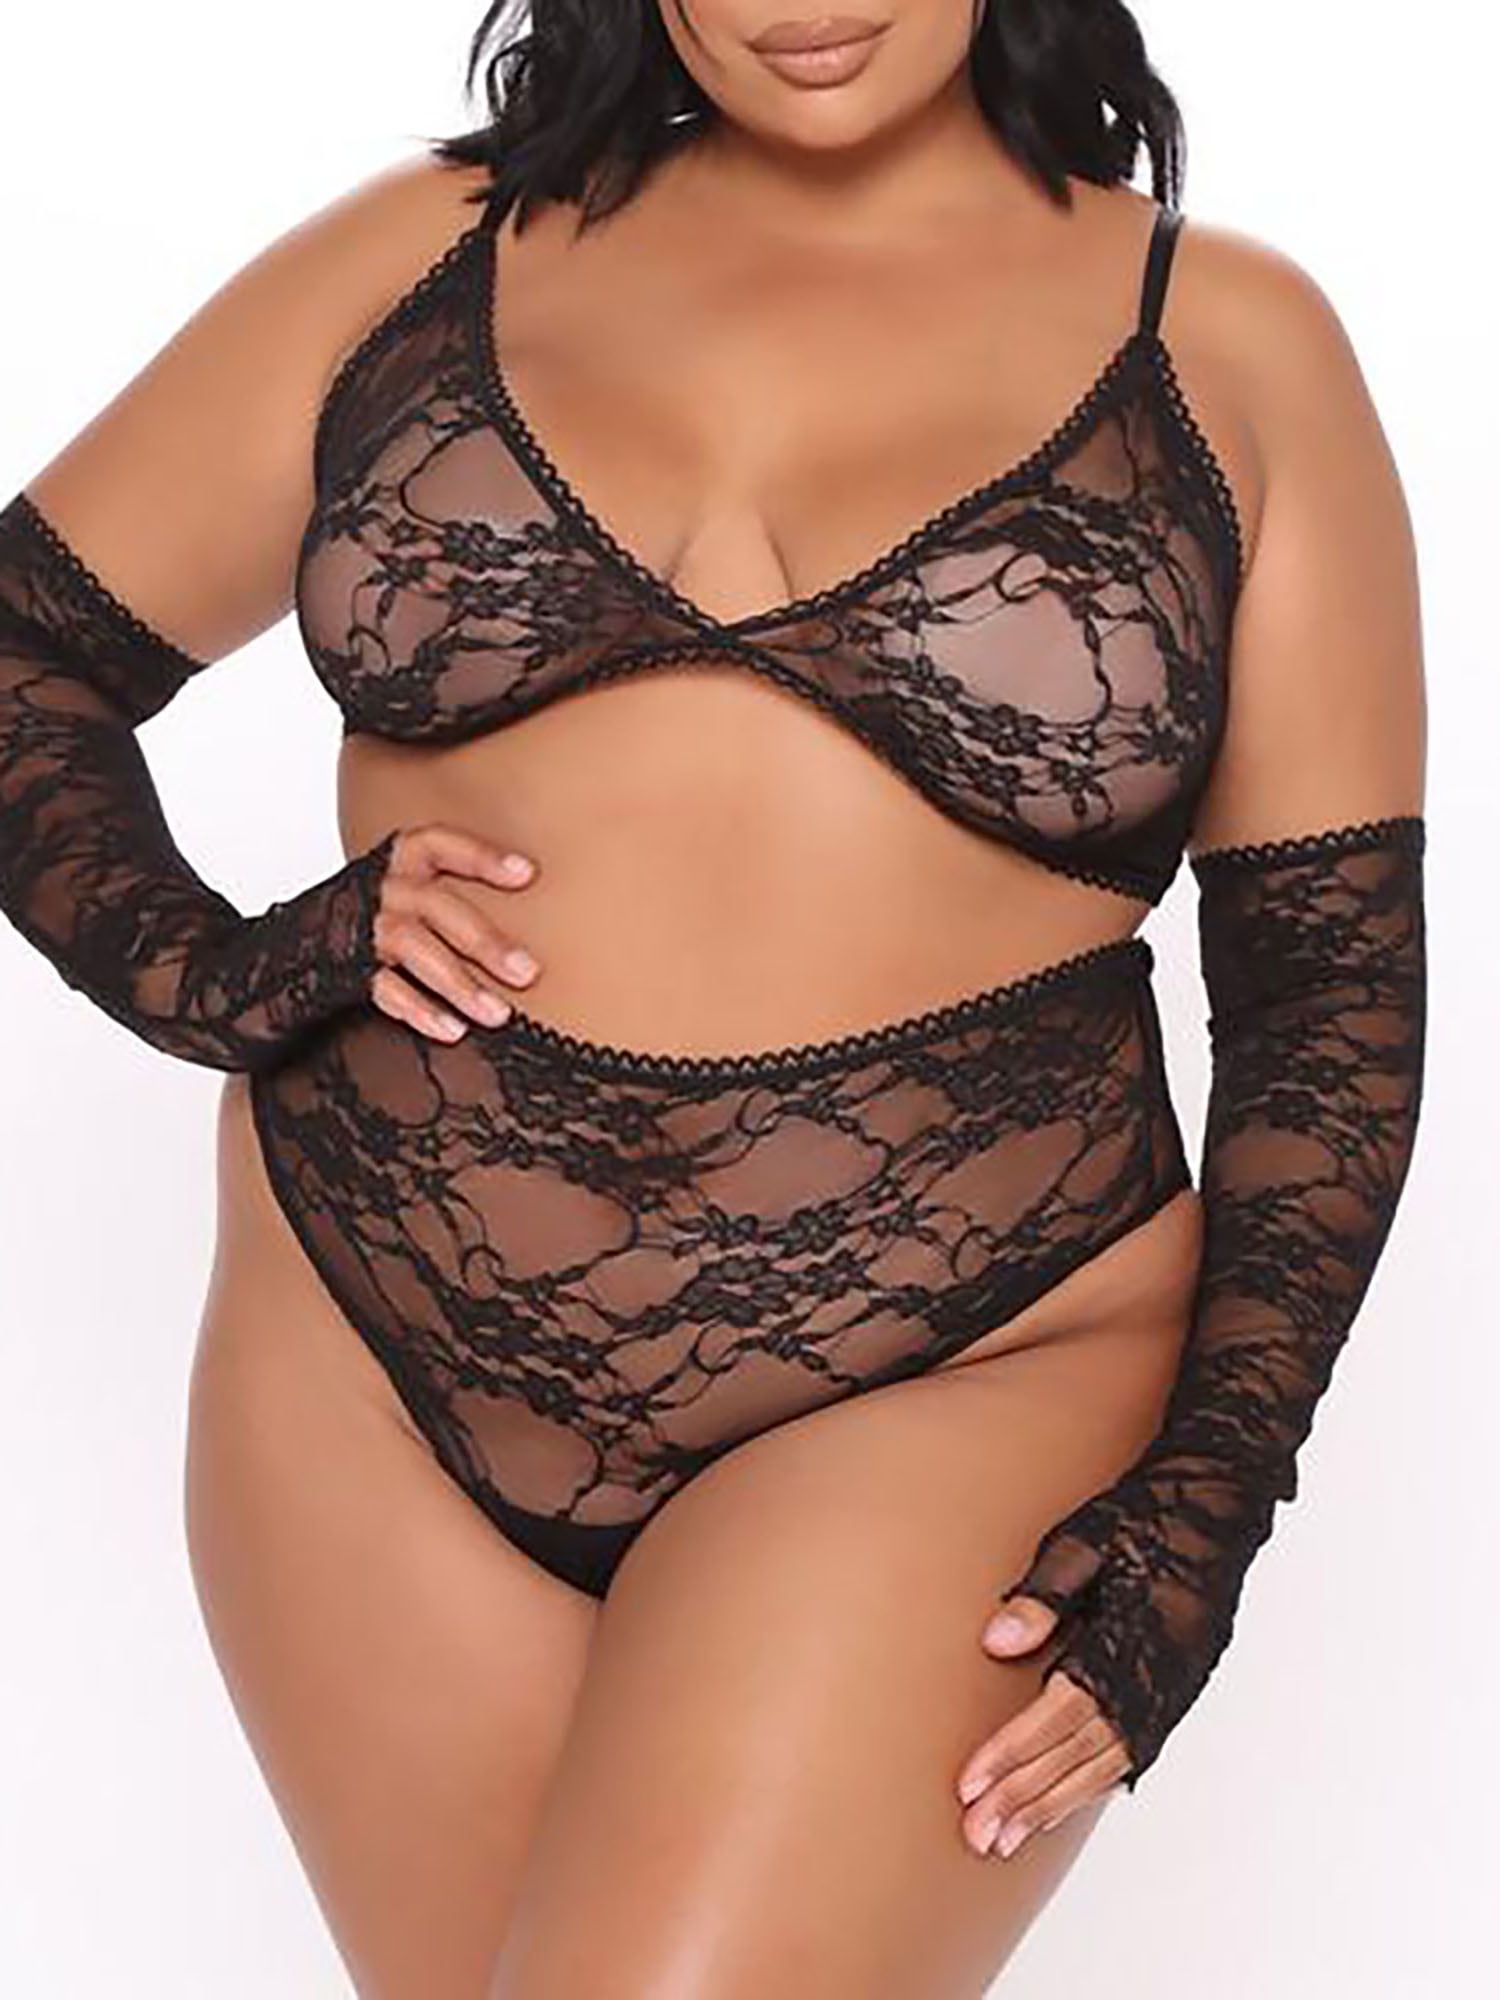 bertha tawana recommends lingerie for sissy pic